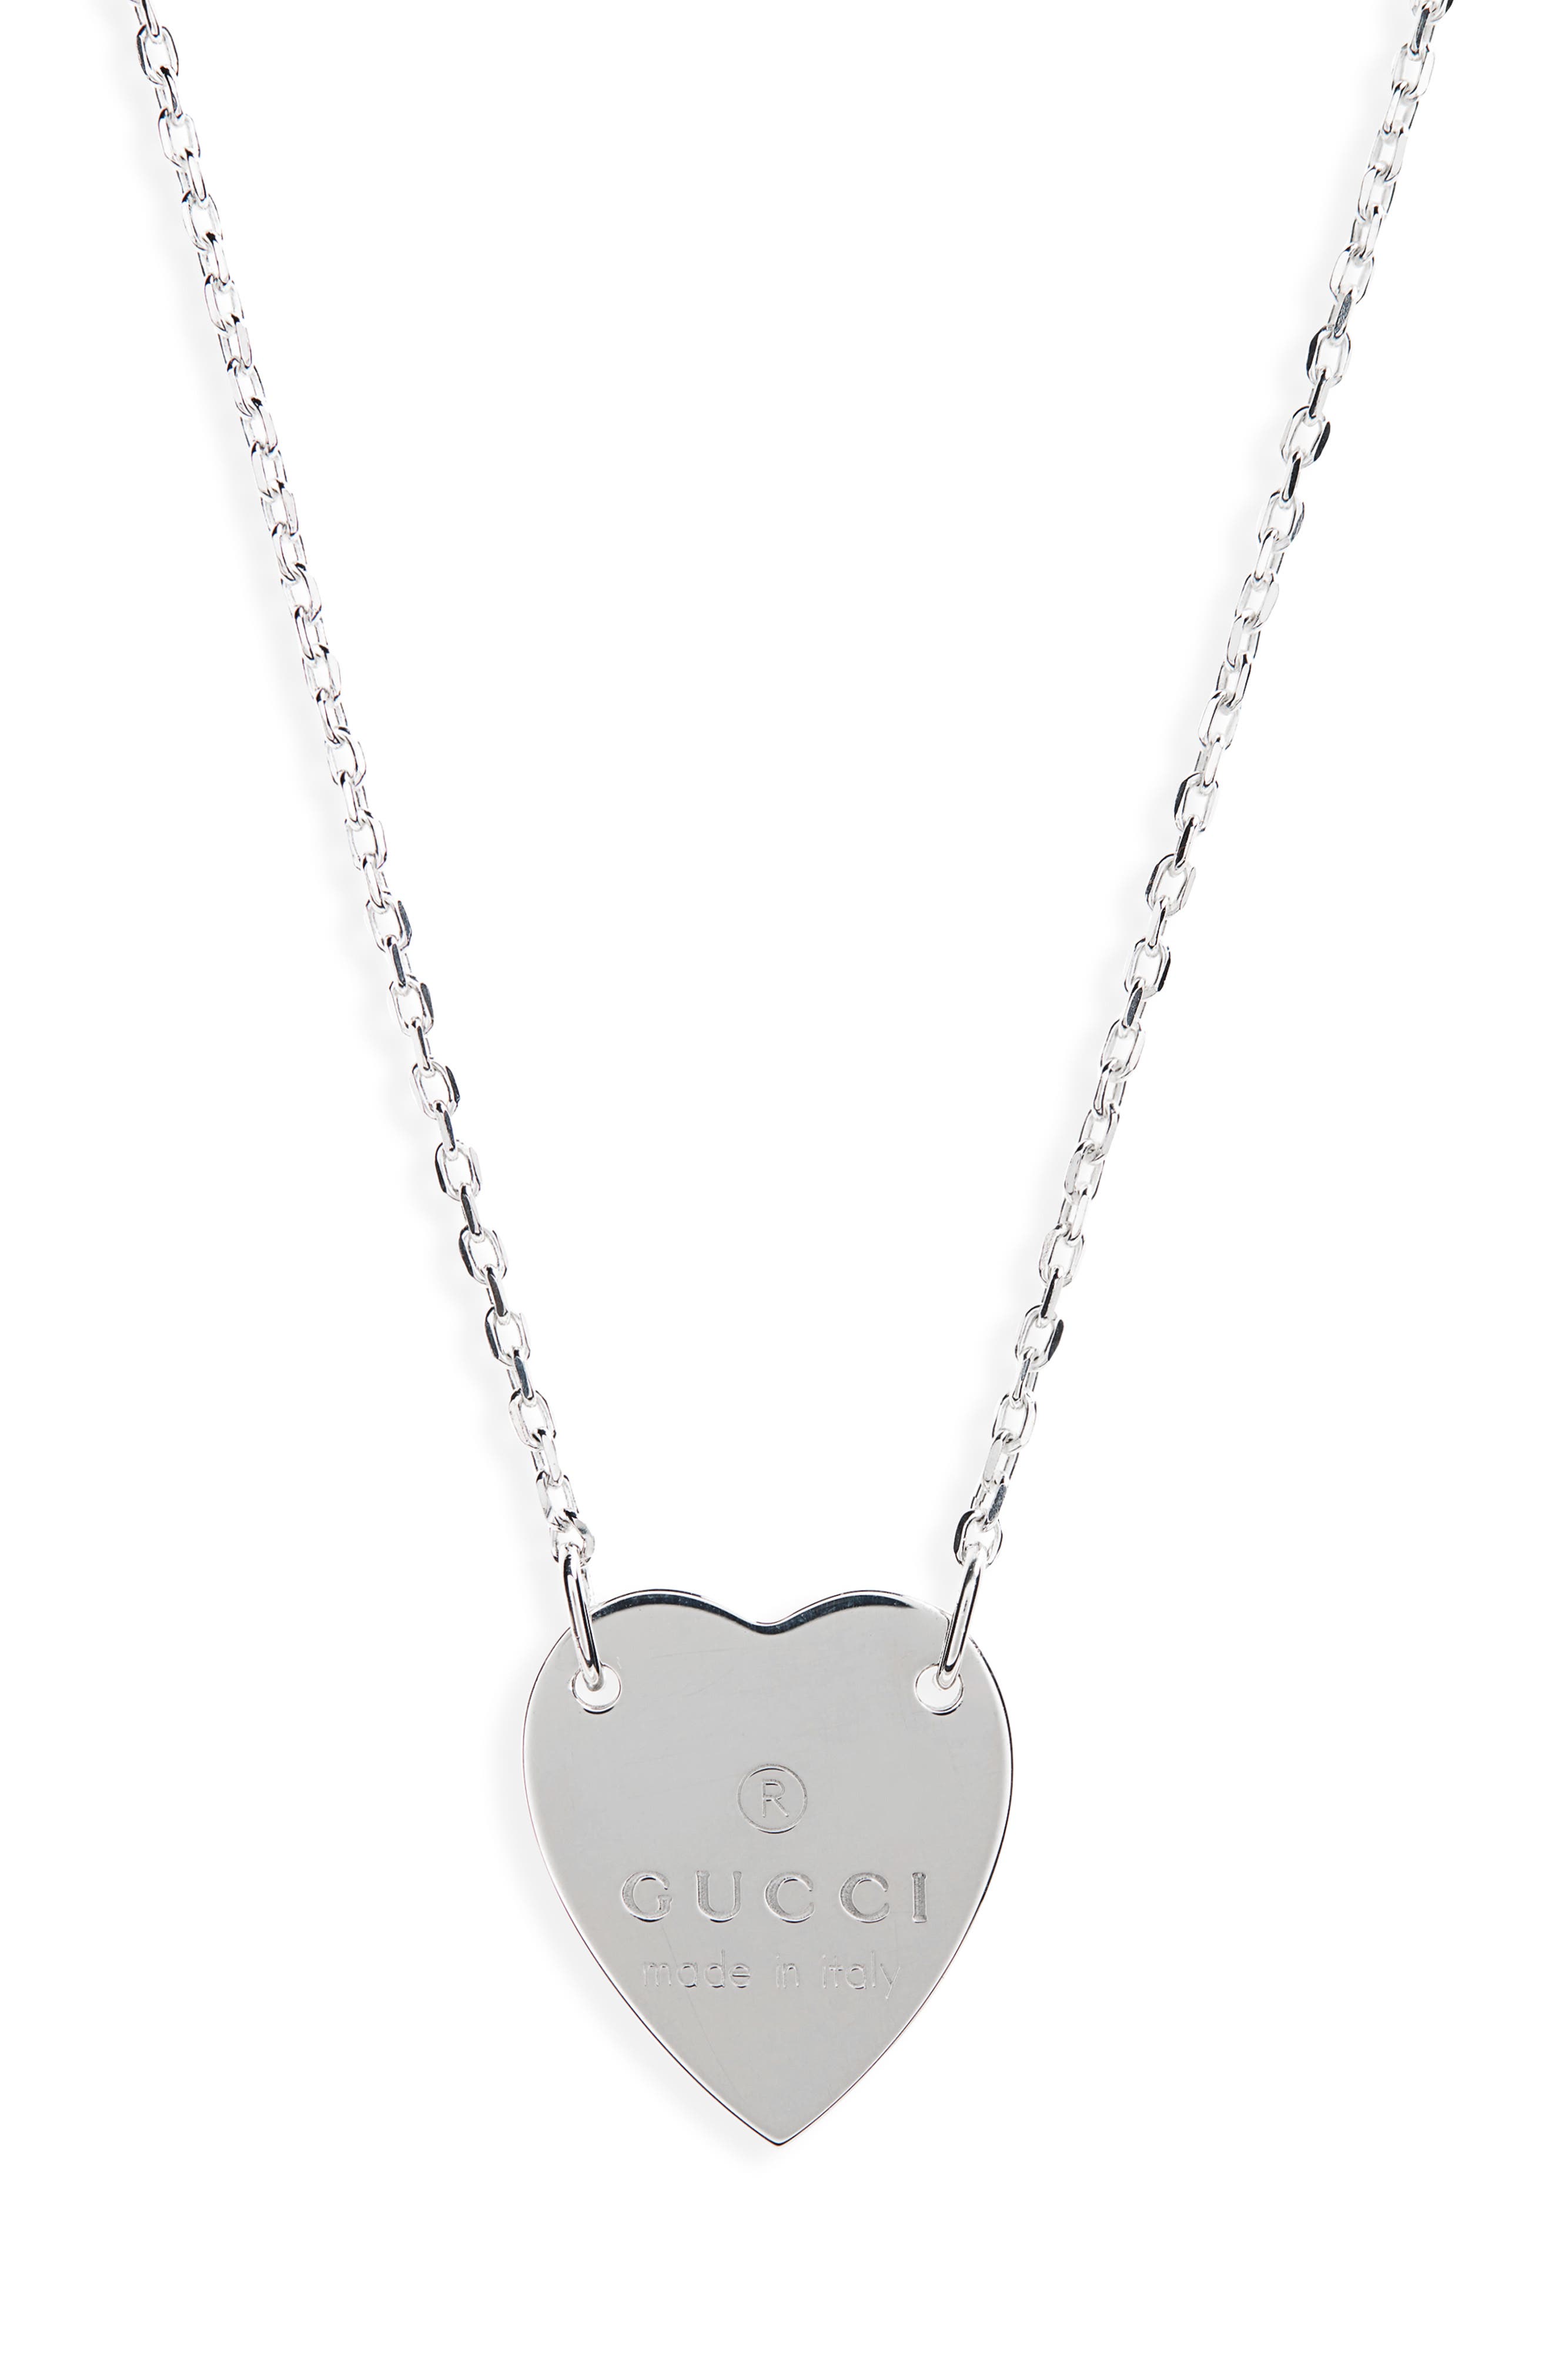 Gucci Trademark Heart Necklace in Sterling Silver at Nordstrom